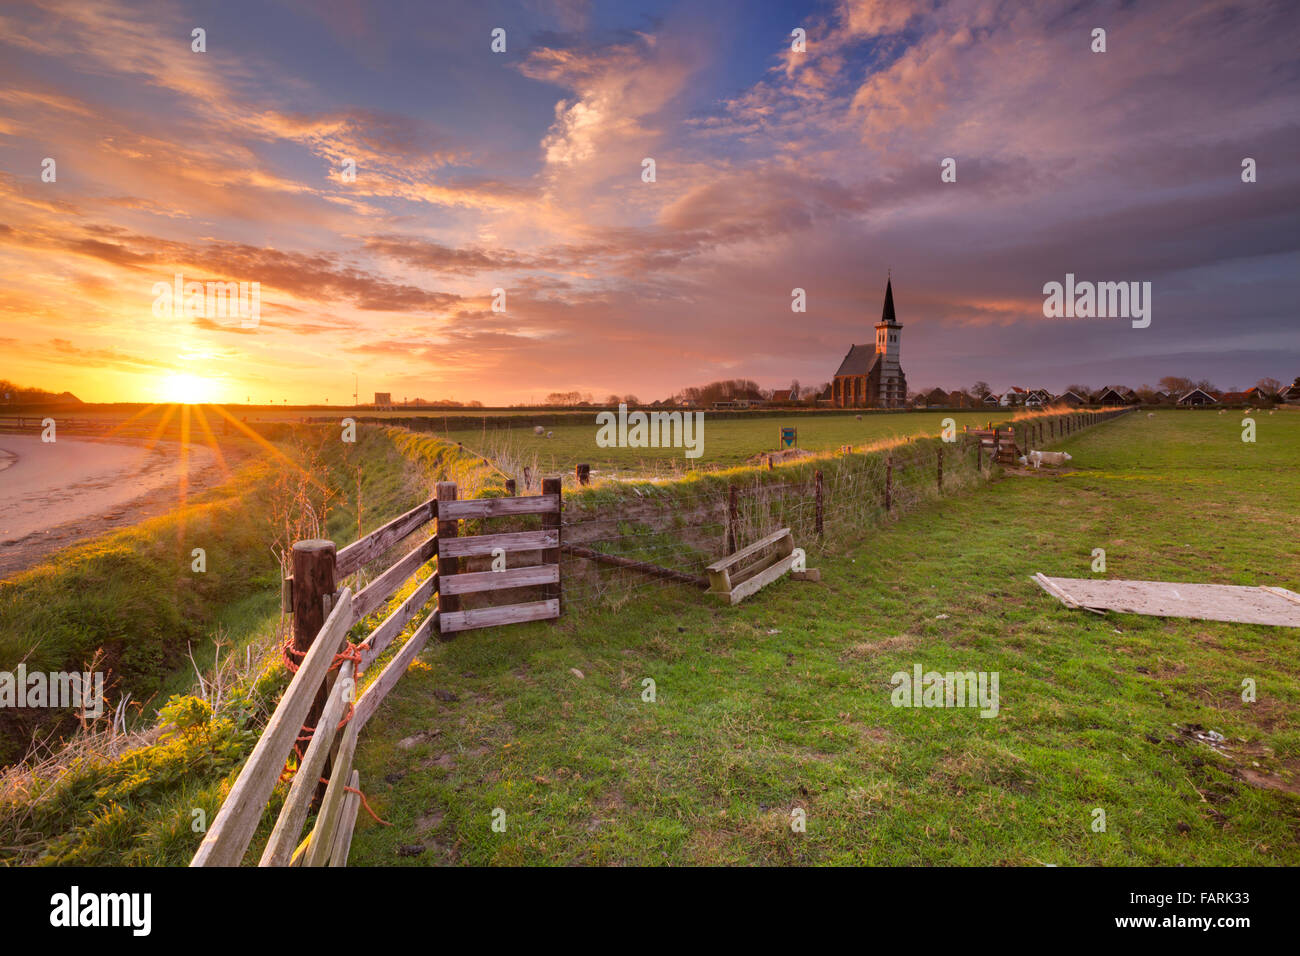 The church of Den Hoorn on the island of Texel in The Netherlands at sunrise. Stock Photo